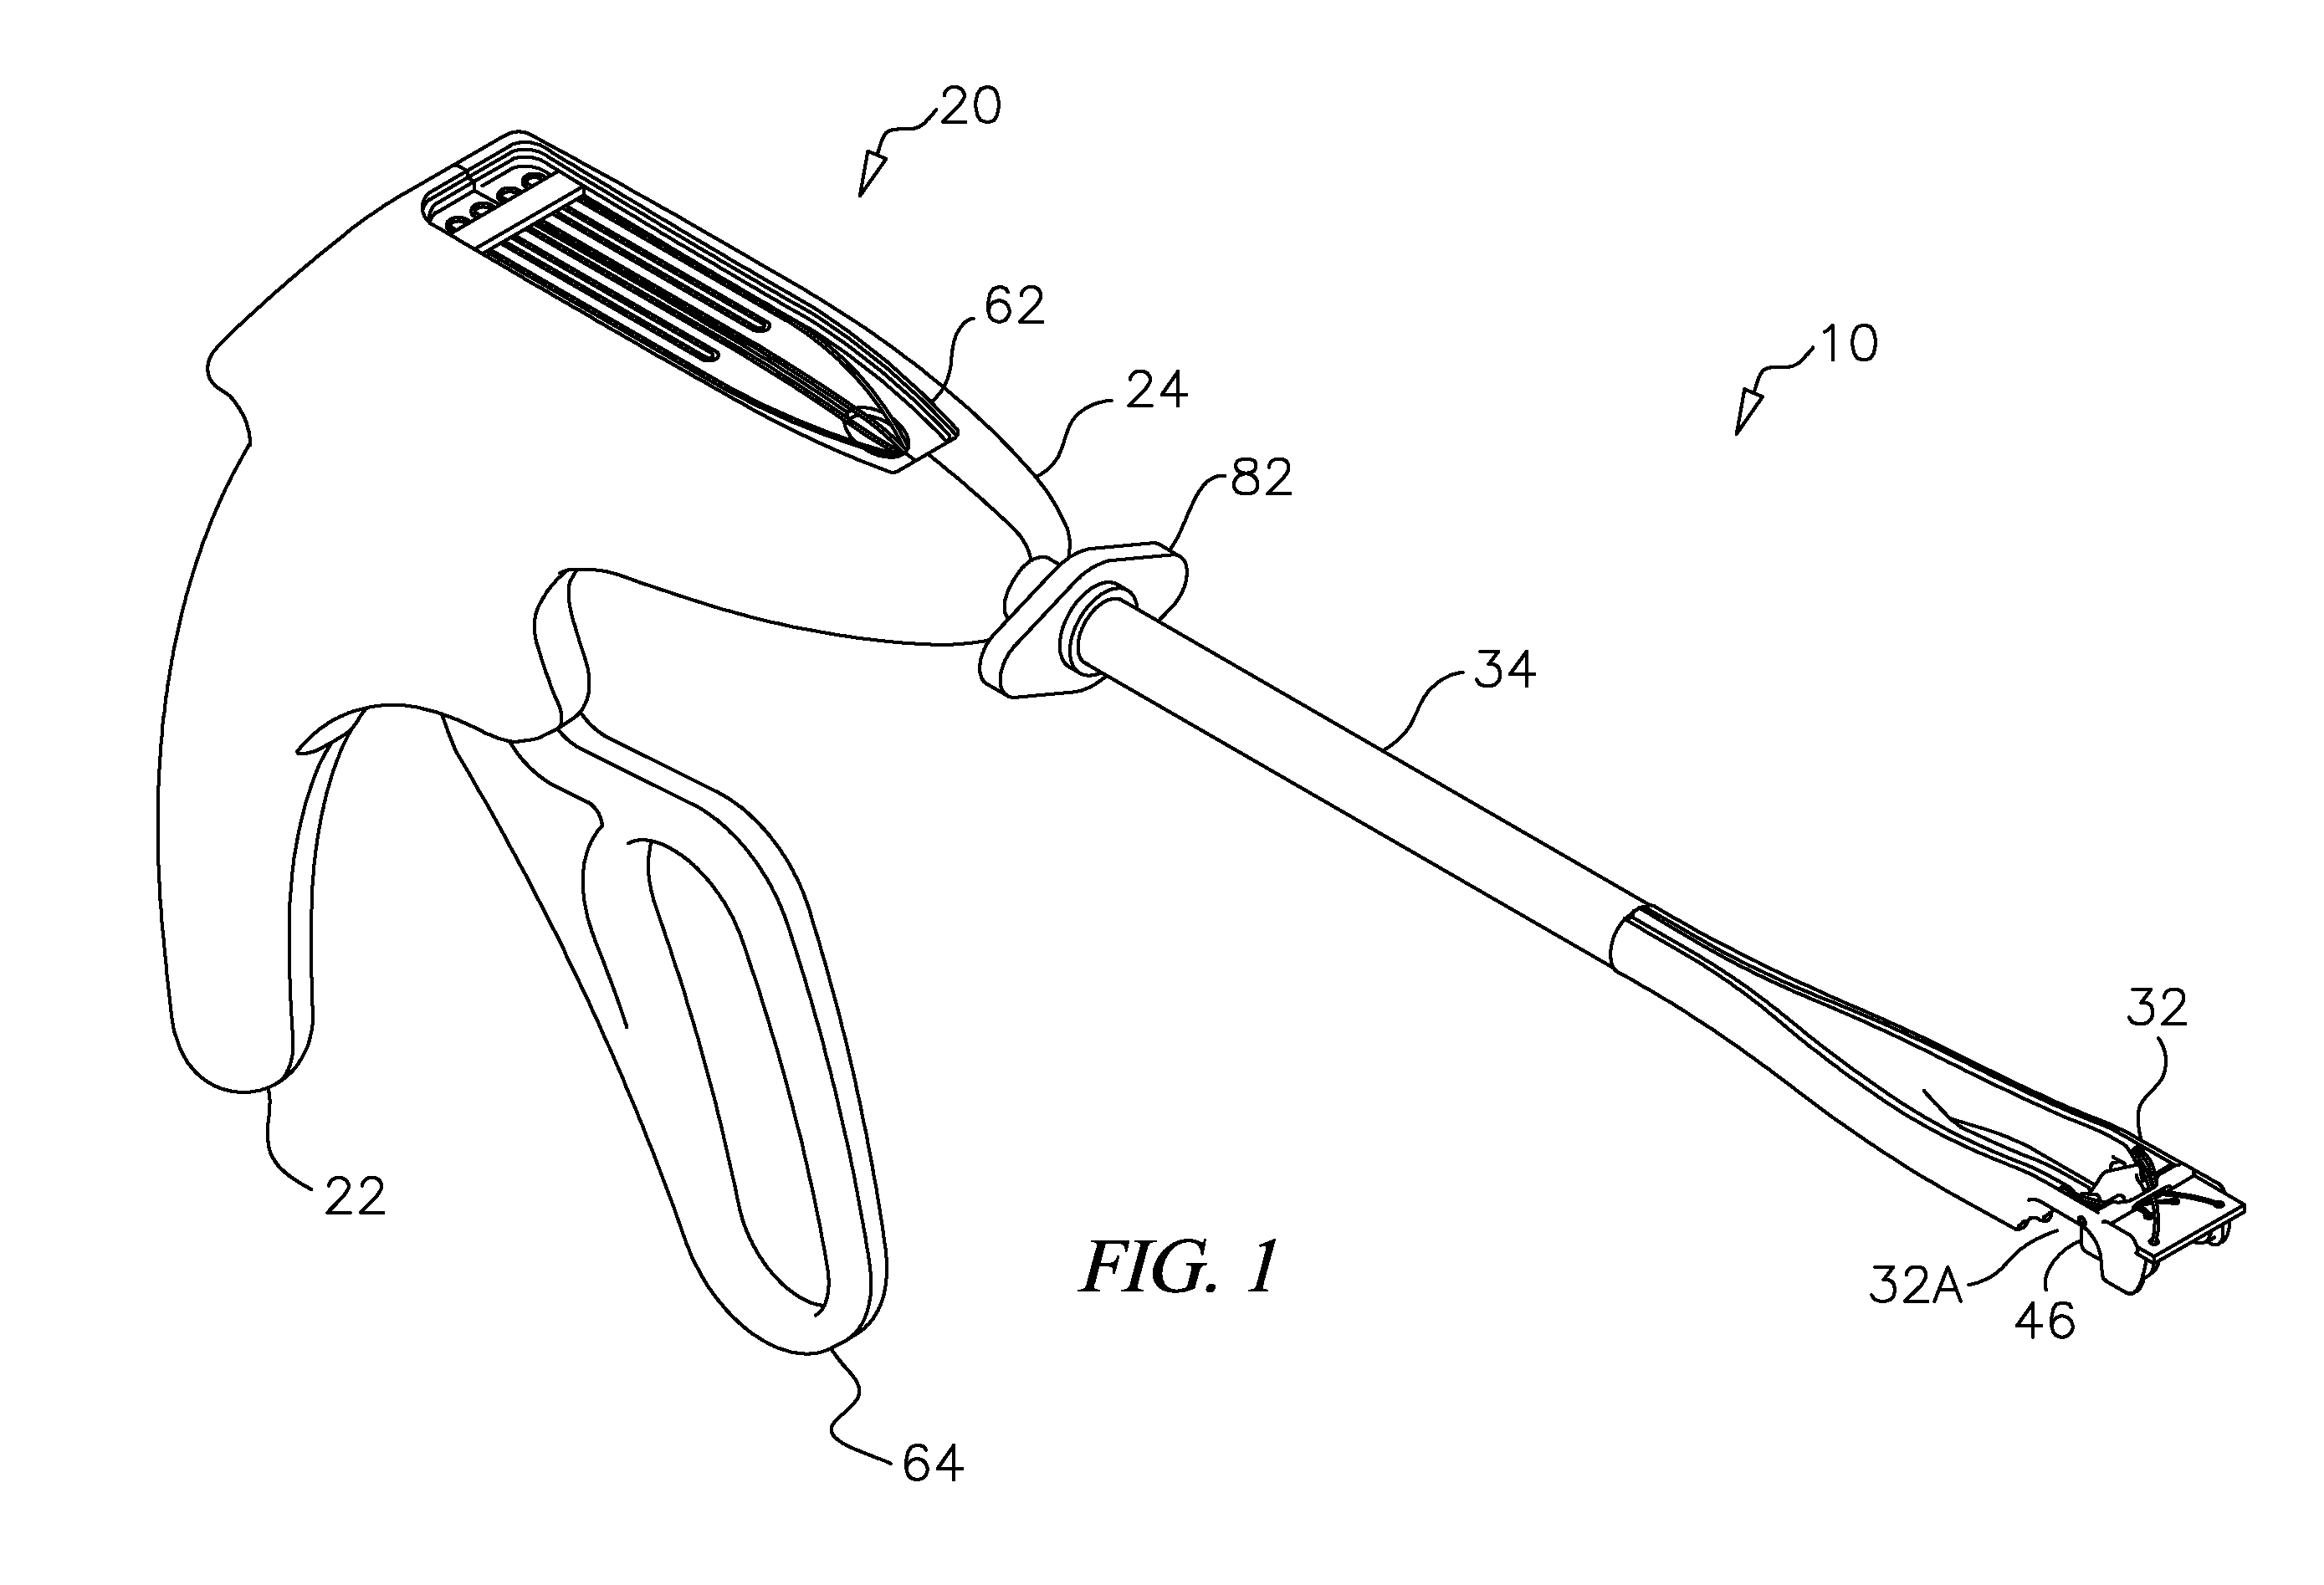 Method and apparatus for closing an opening in thick, moving tissue